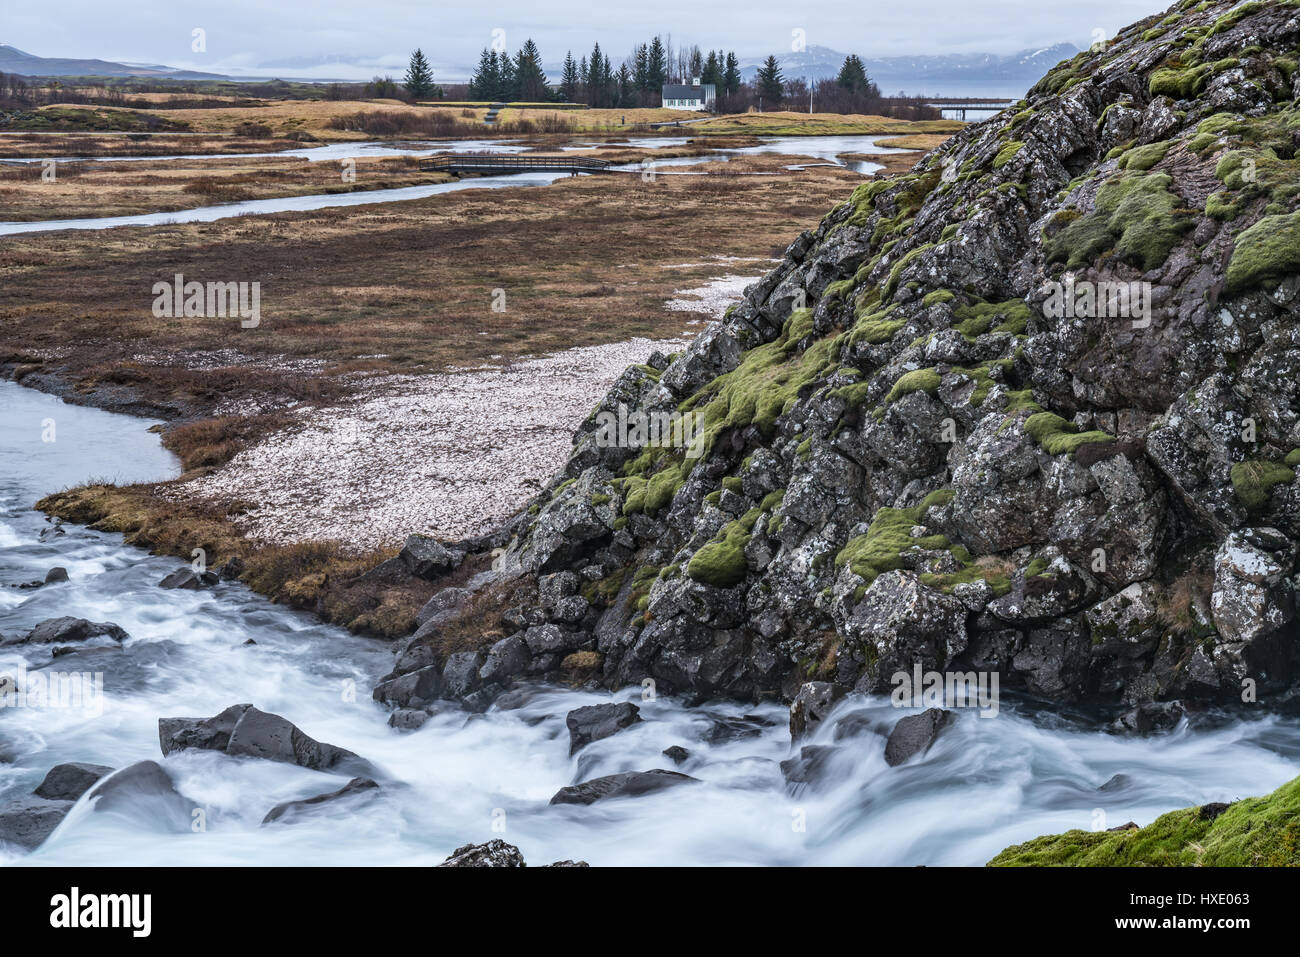 Thingvellir National Park, Iceland is a UNESCO World Heritage Site and popular travel destination located along the Golden Circle northeast of Reyjavi Stock Photo